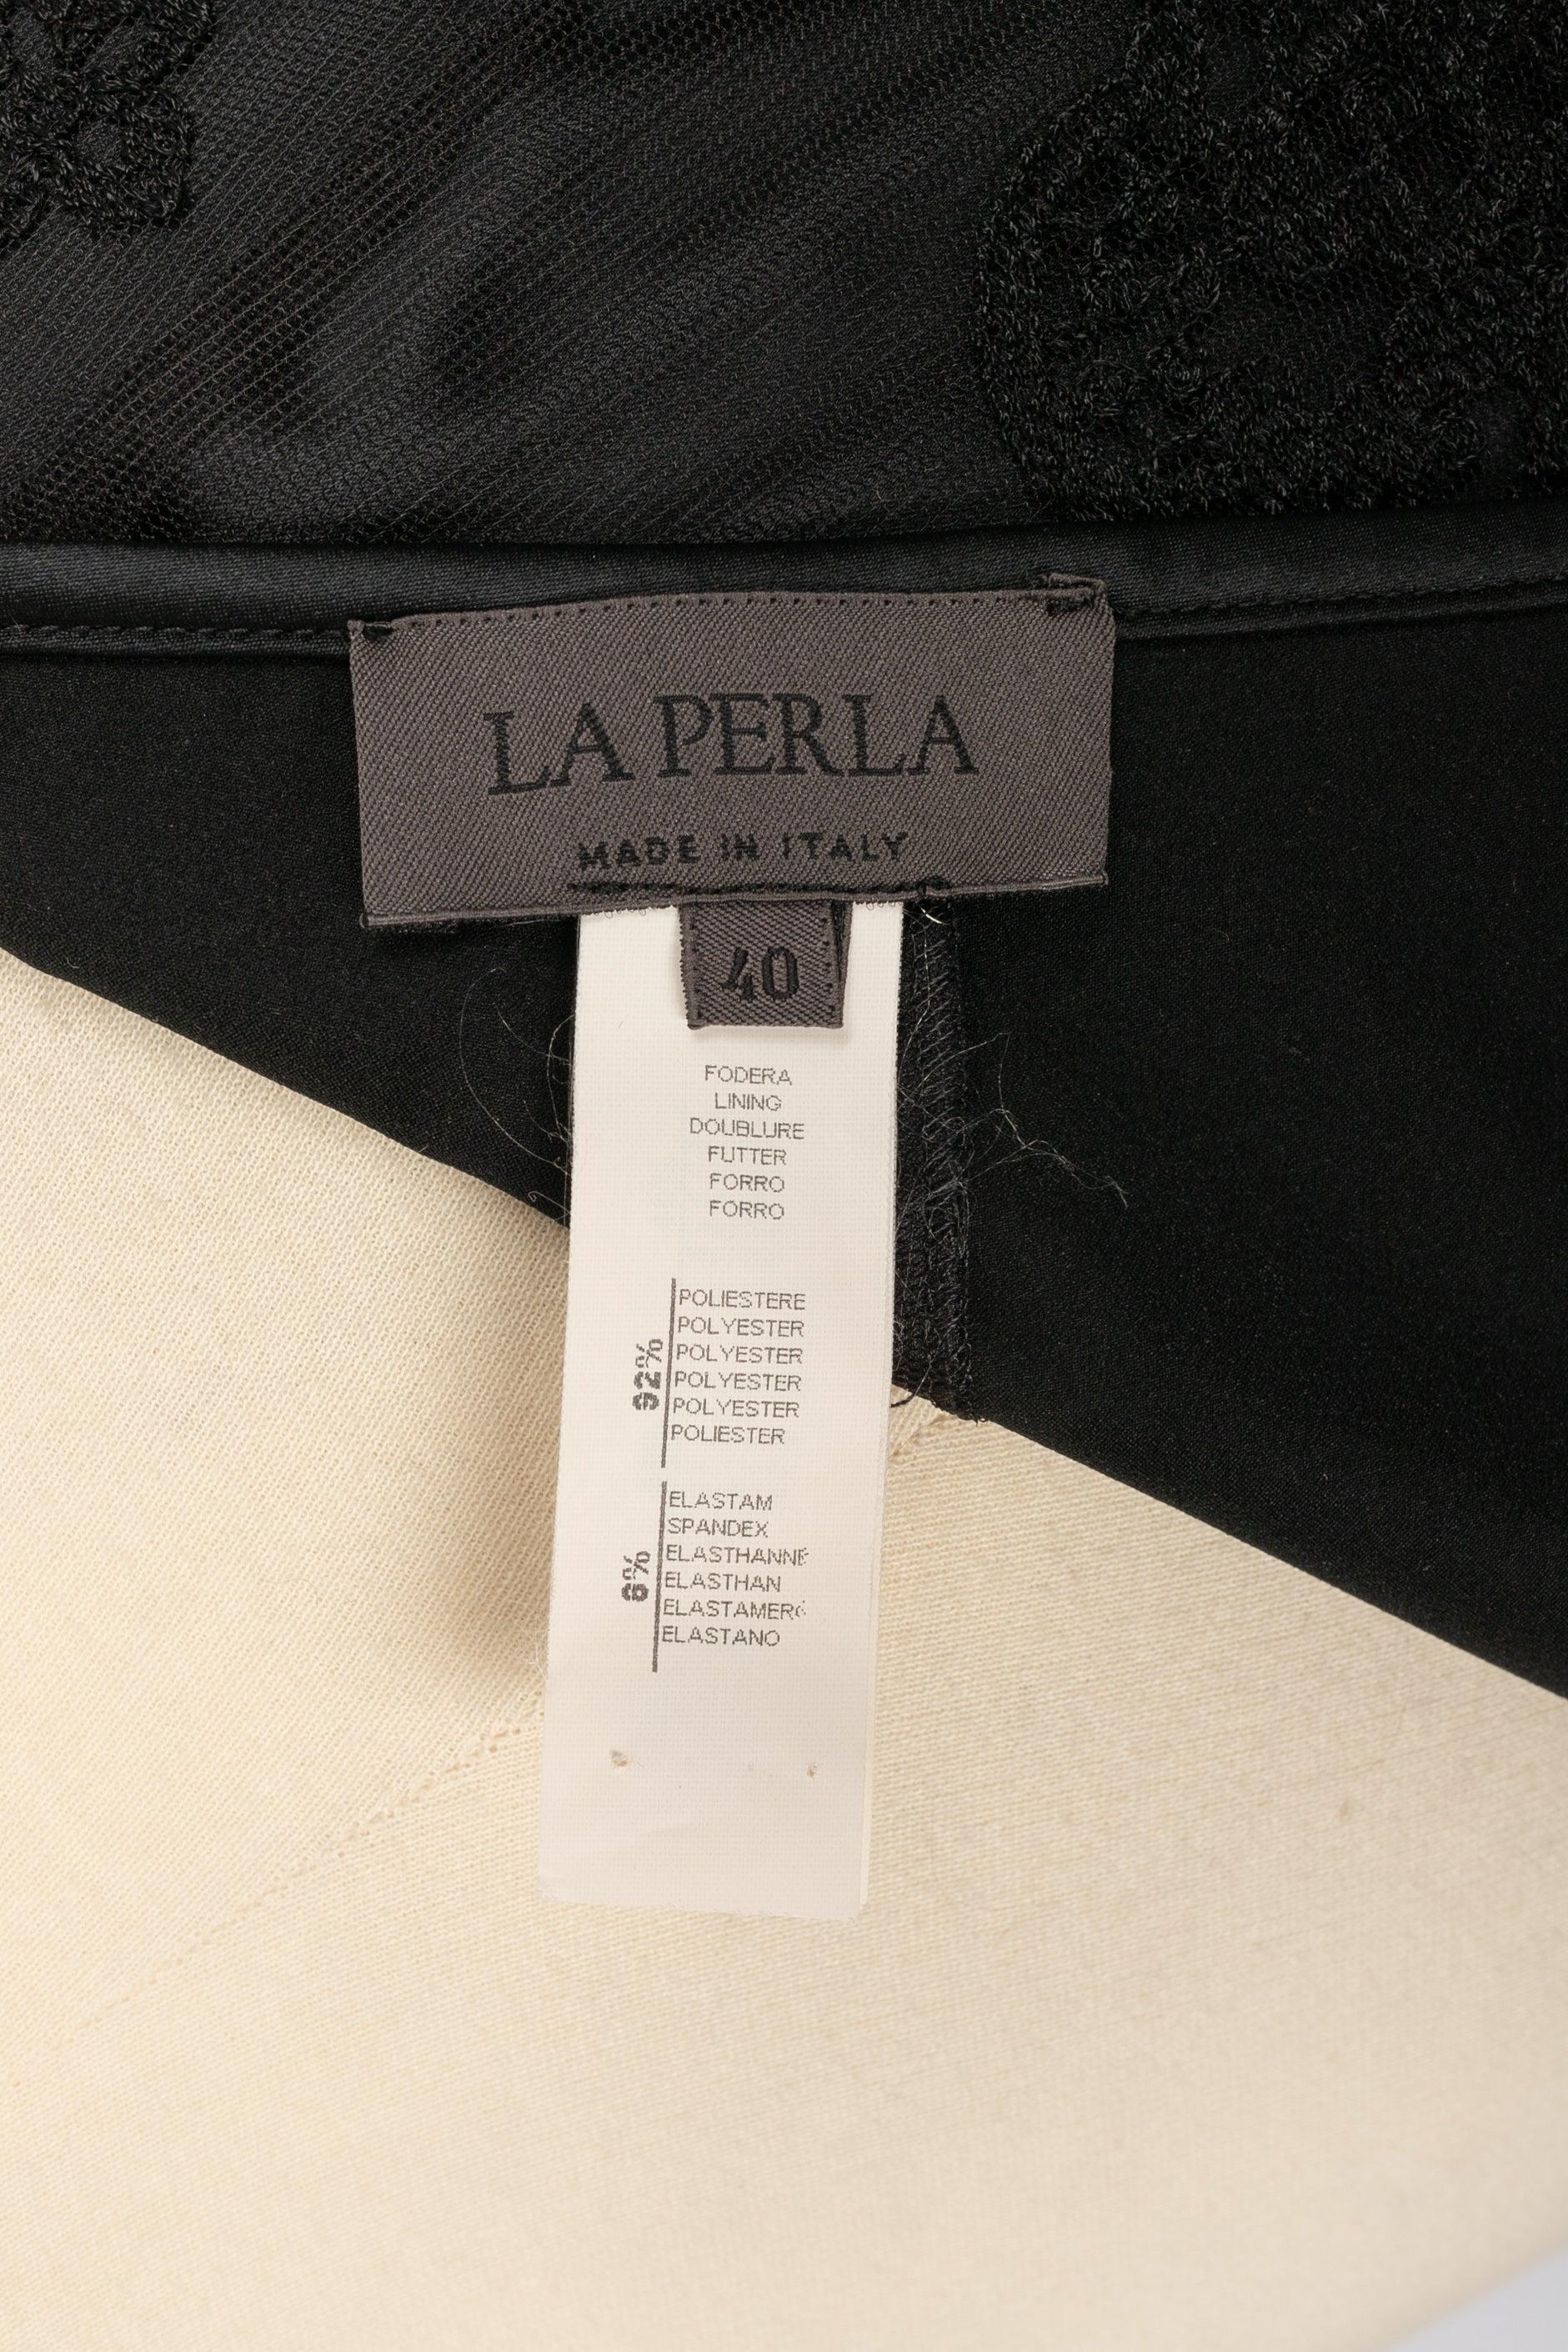 La Perla Black Satin Pants Enlivened with a Tulle Embroidered with Patterns For Sale 3